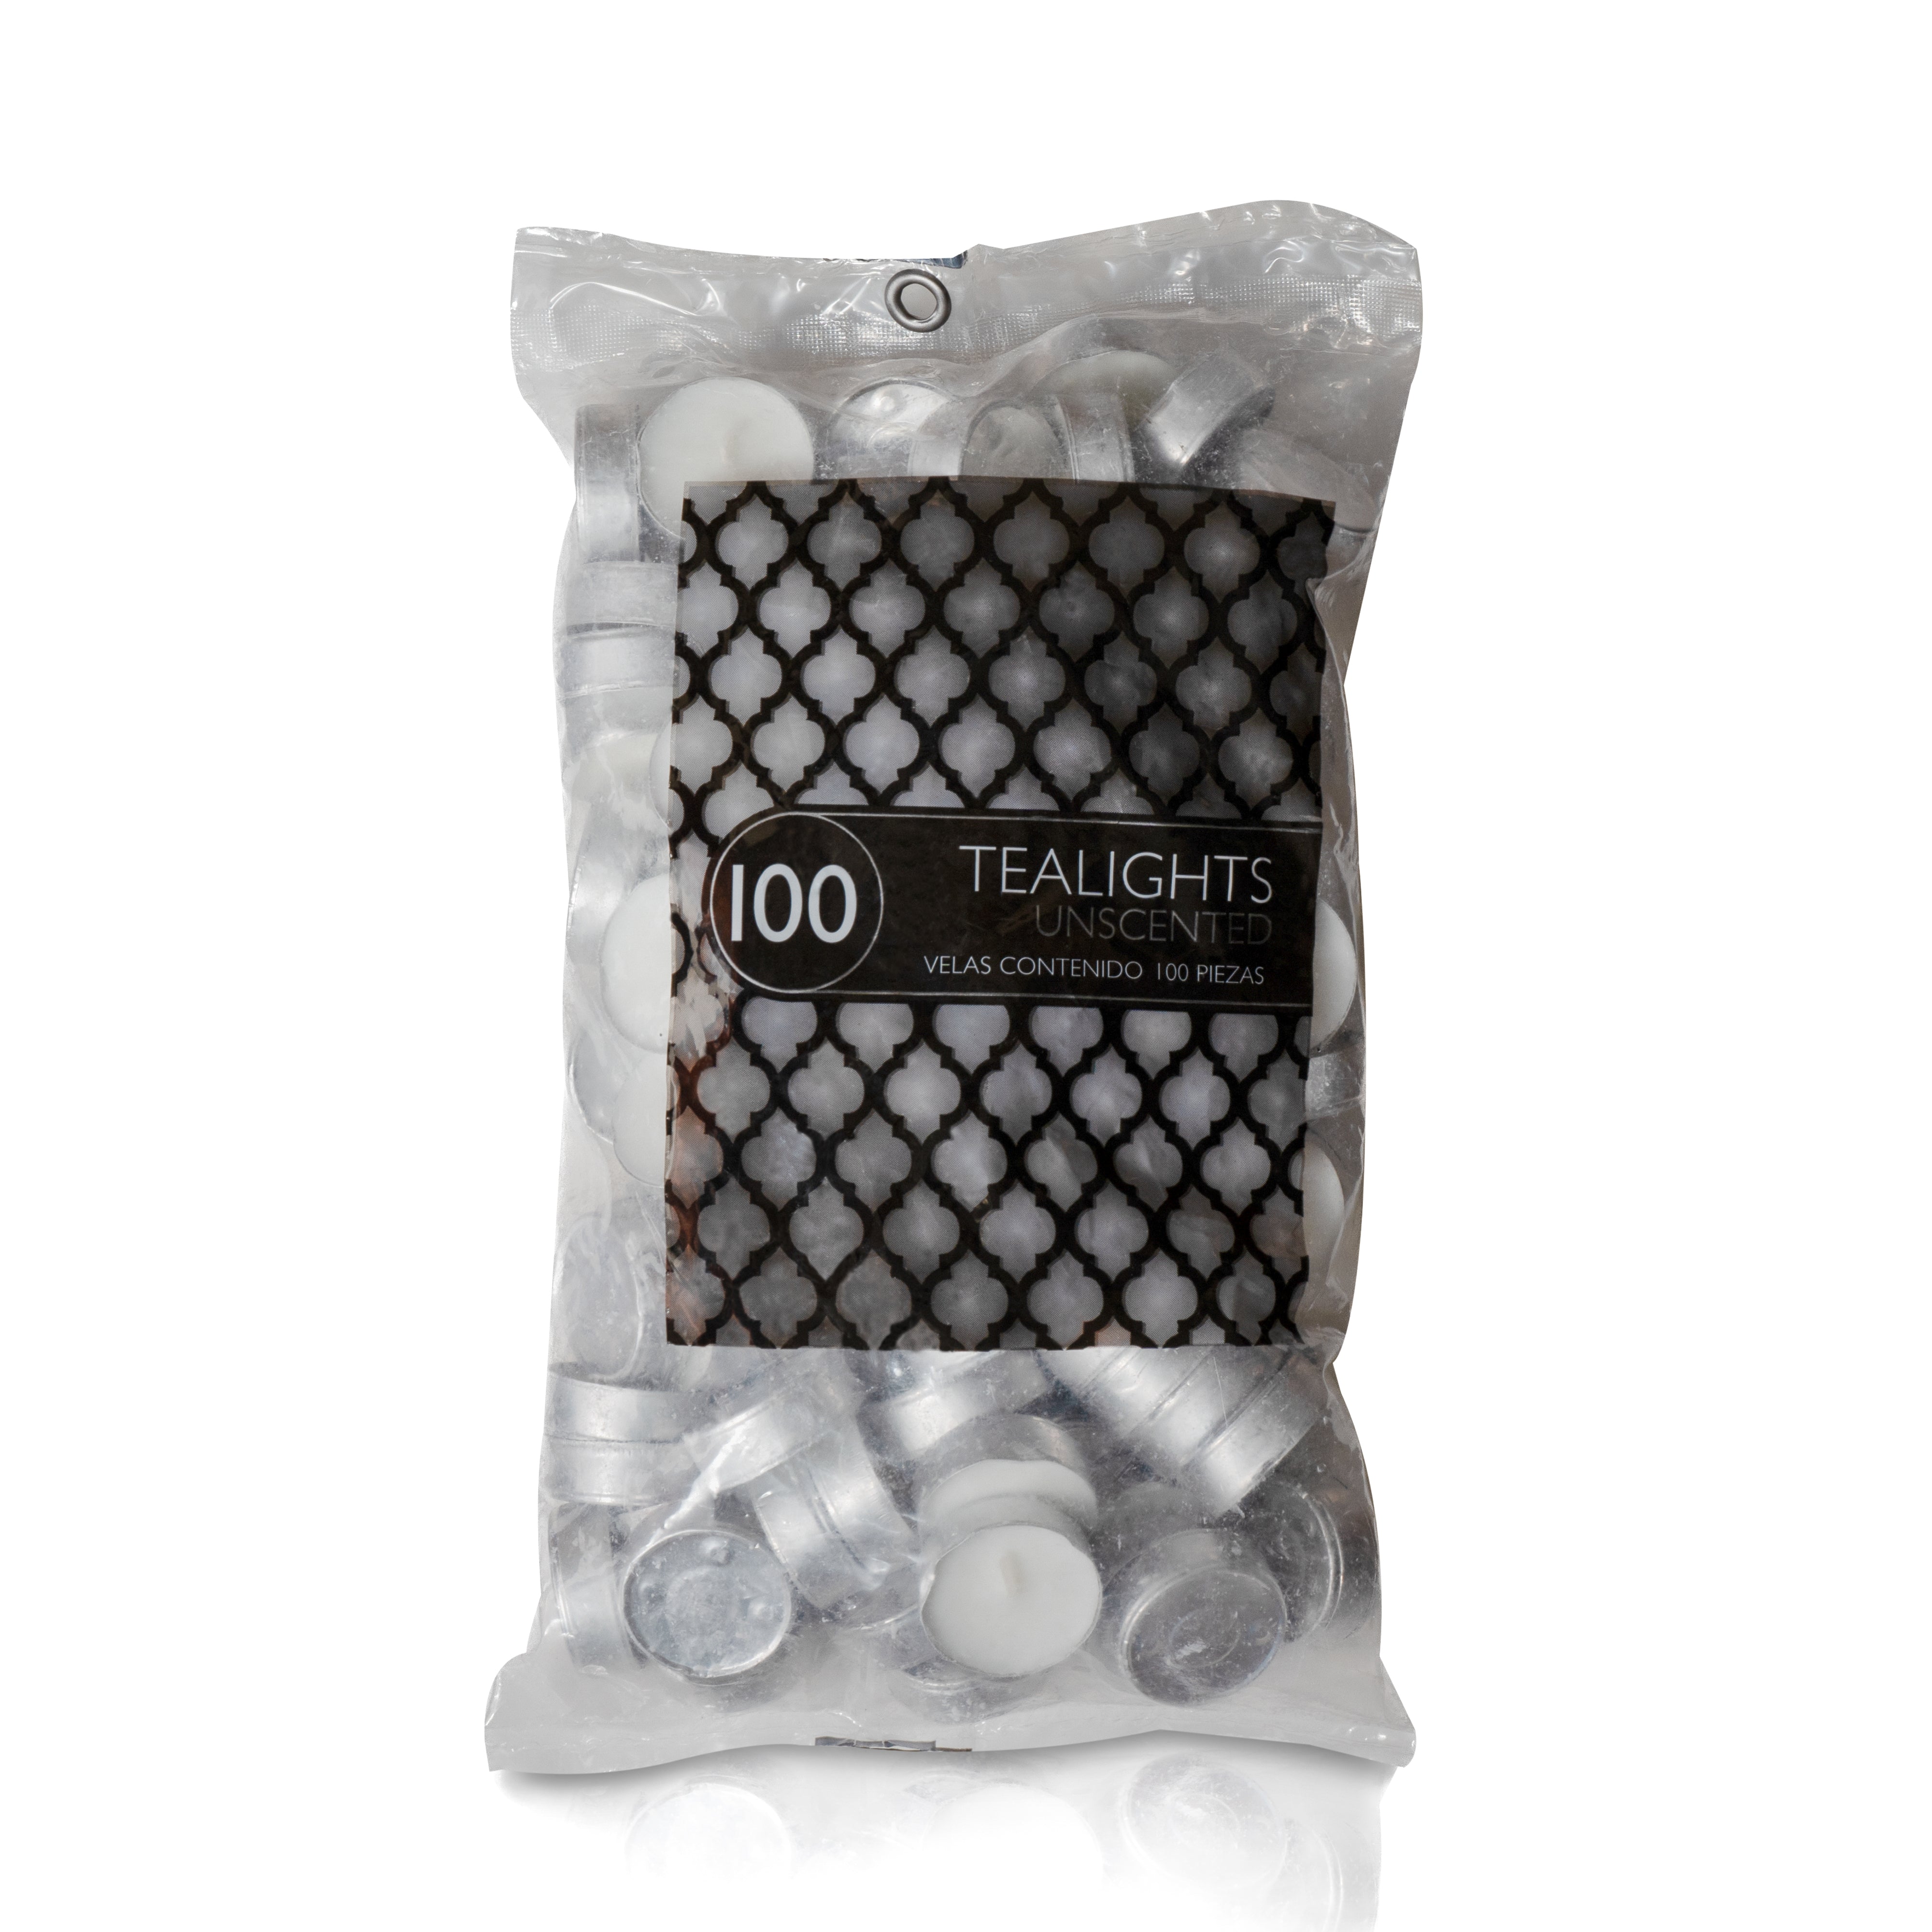 USA Tealights - "White Unscented" - 100 Pack- Made in USA (18 Count)